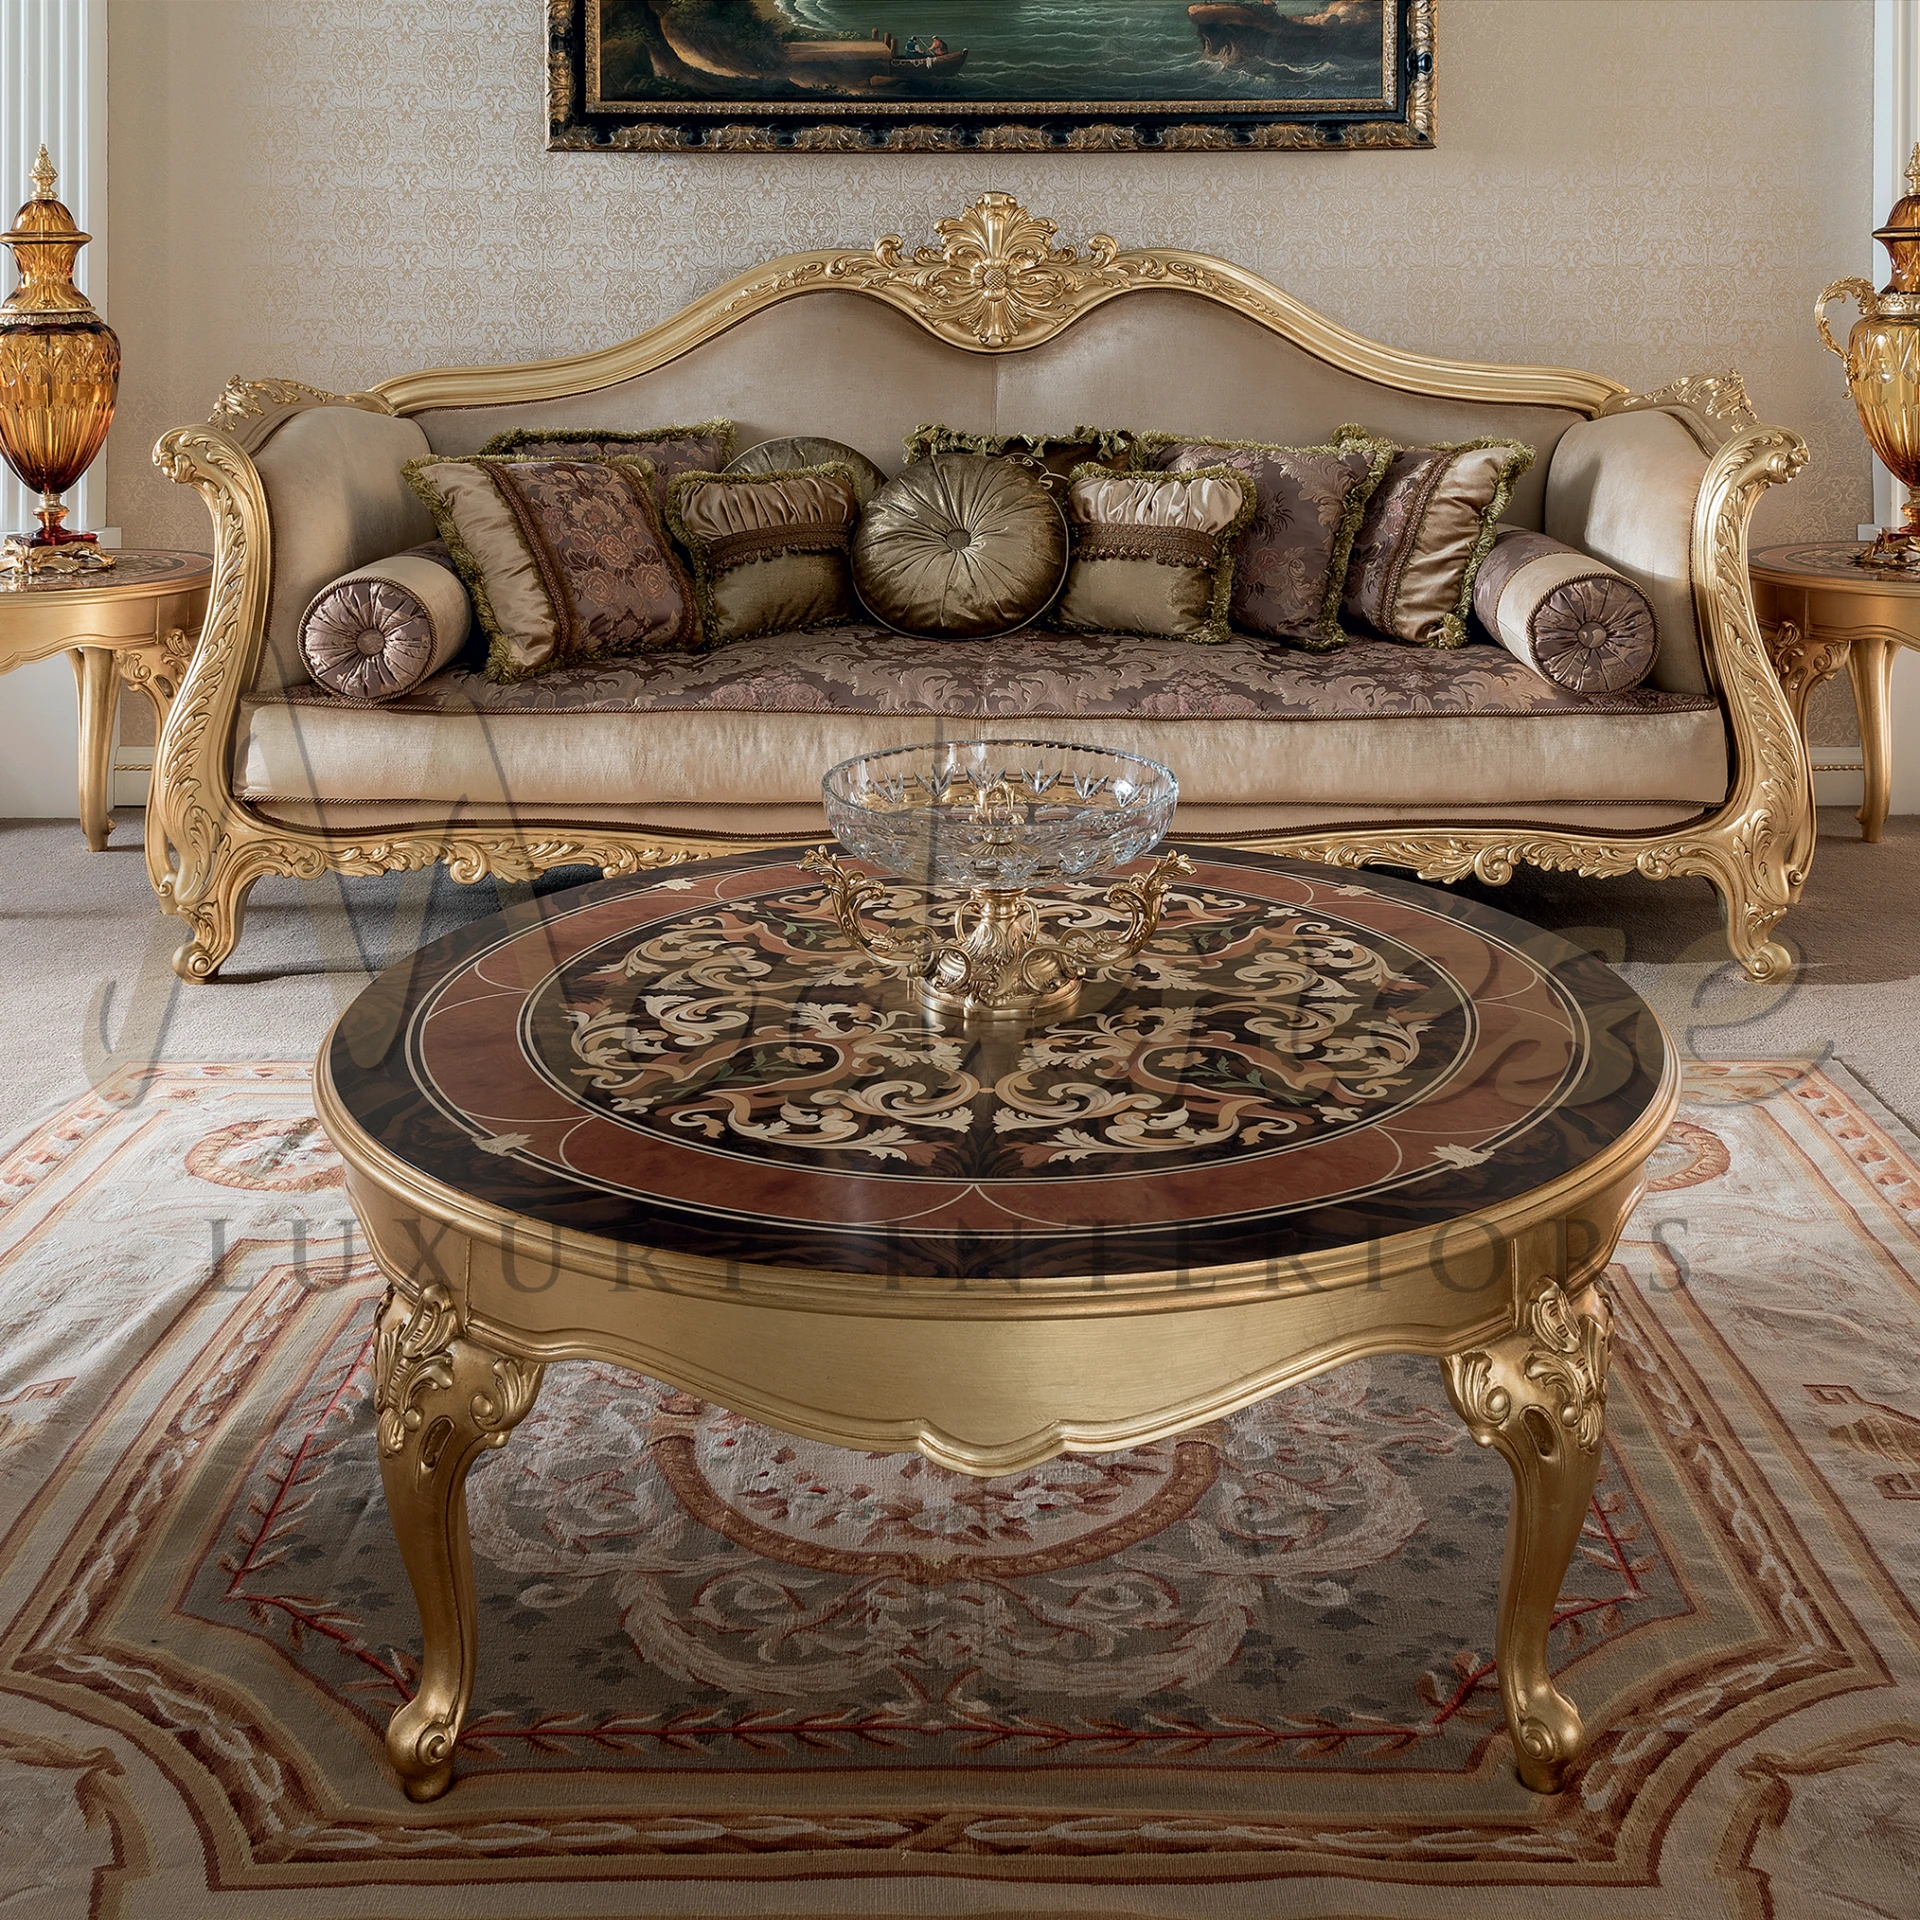 Beige fabric sofa offering a classic and timeless look, ideal for both traditional and modern interior design themes.